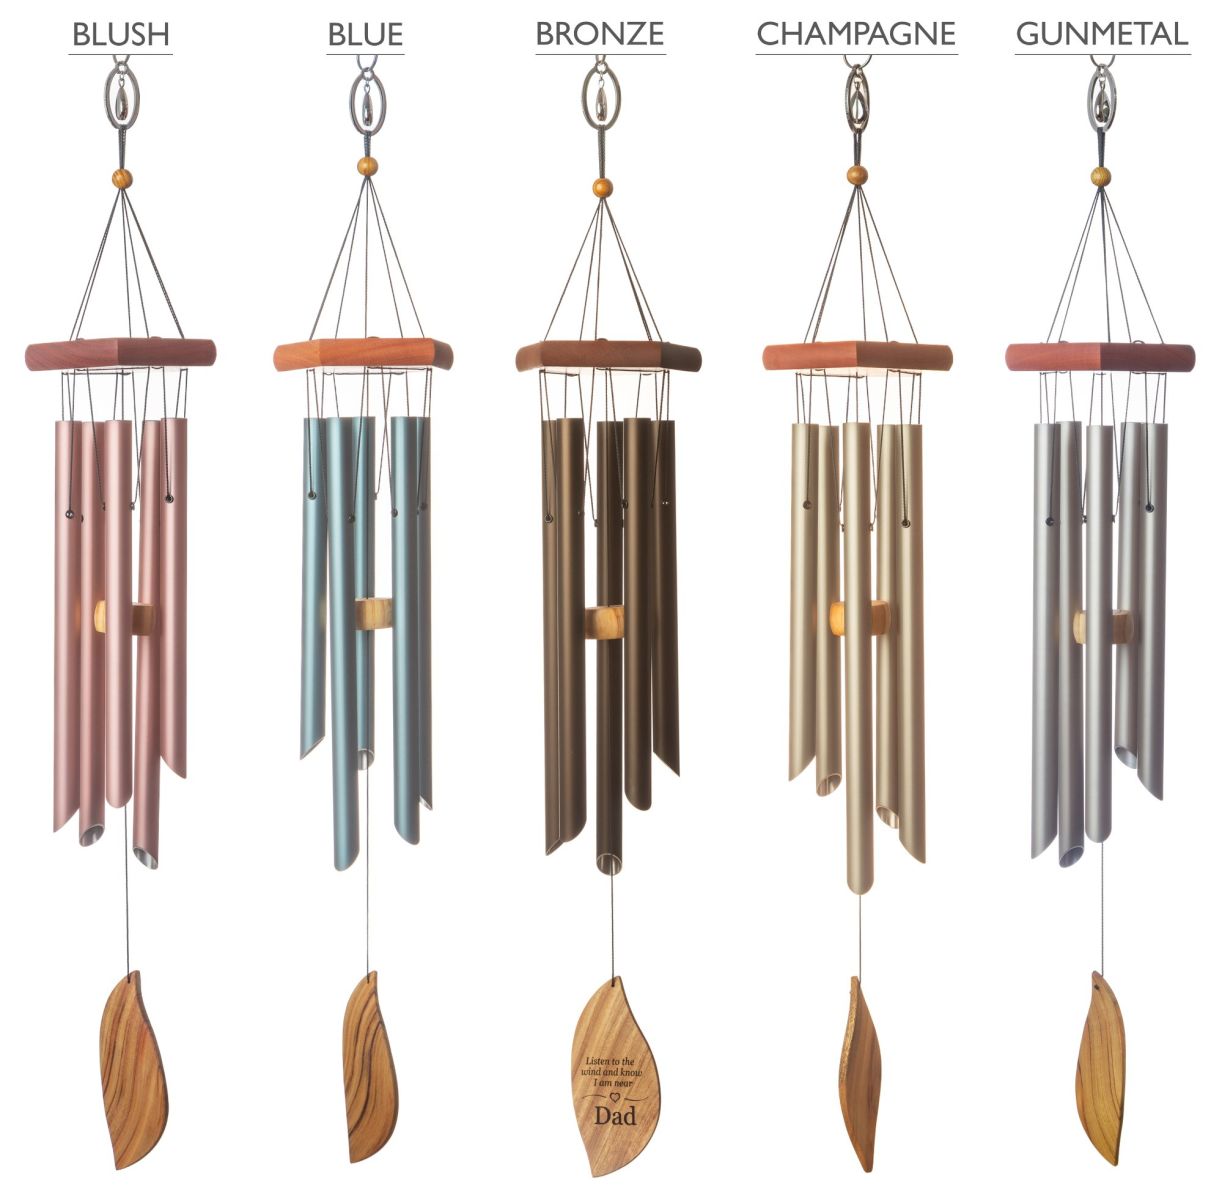 Cremation ashes urn memorial wind chime